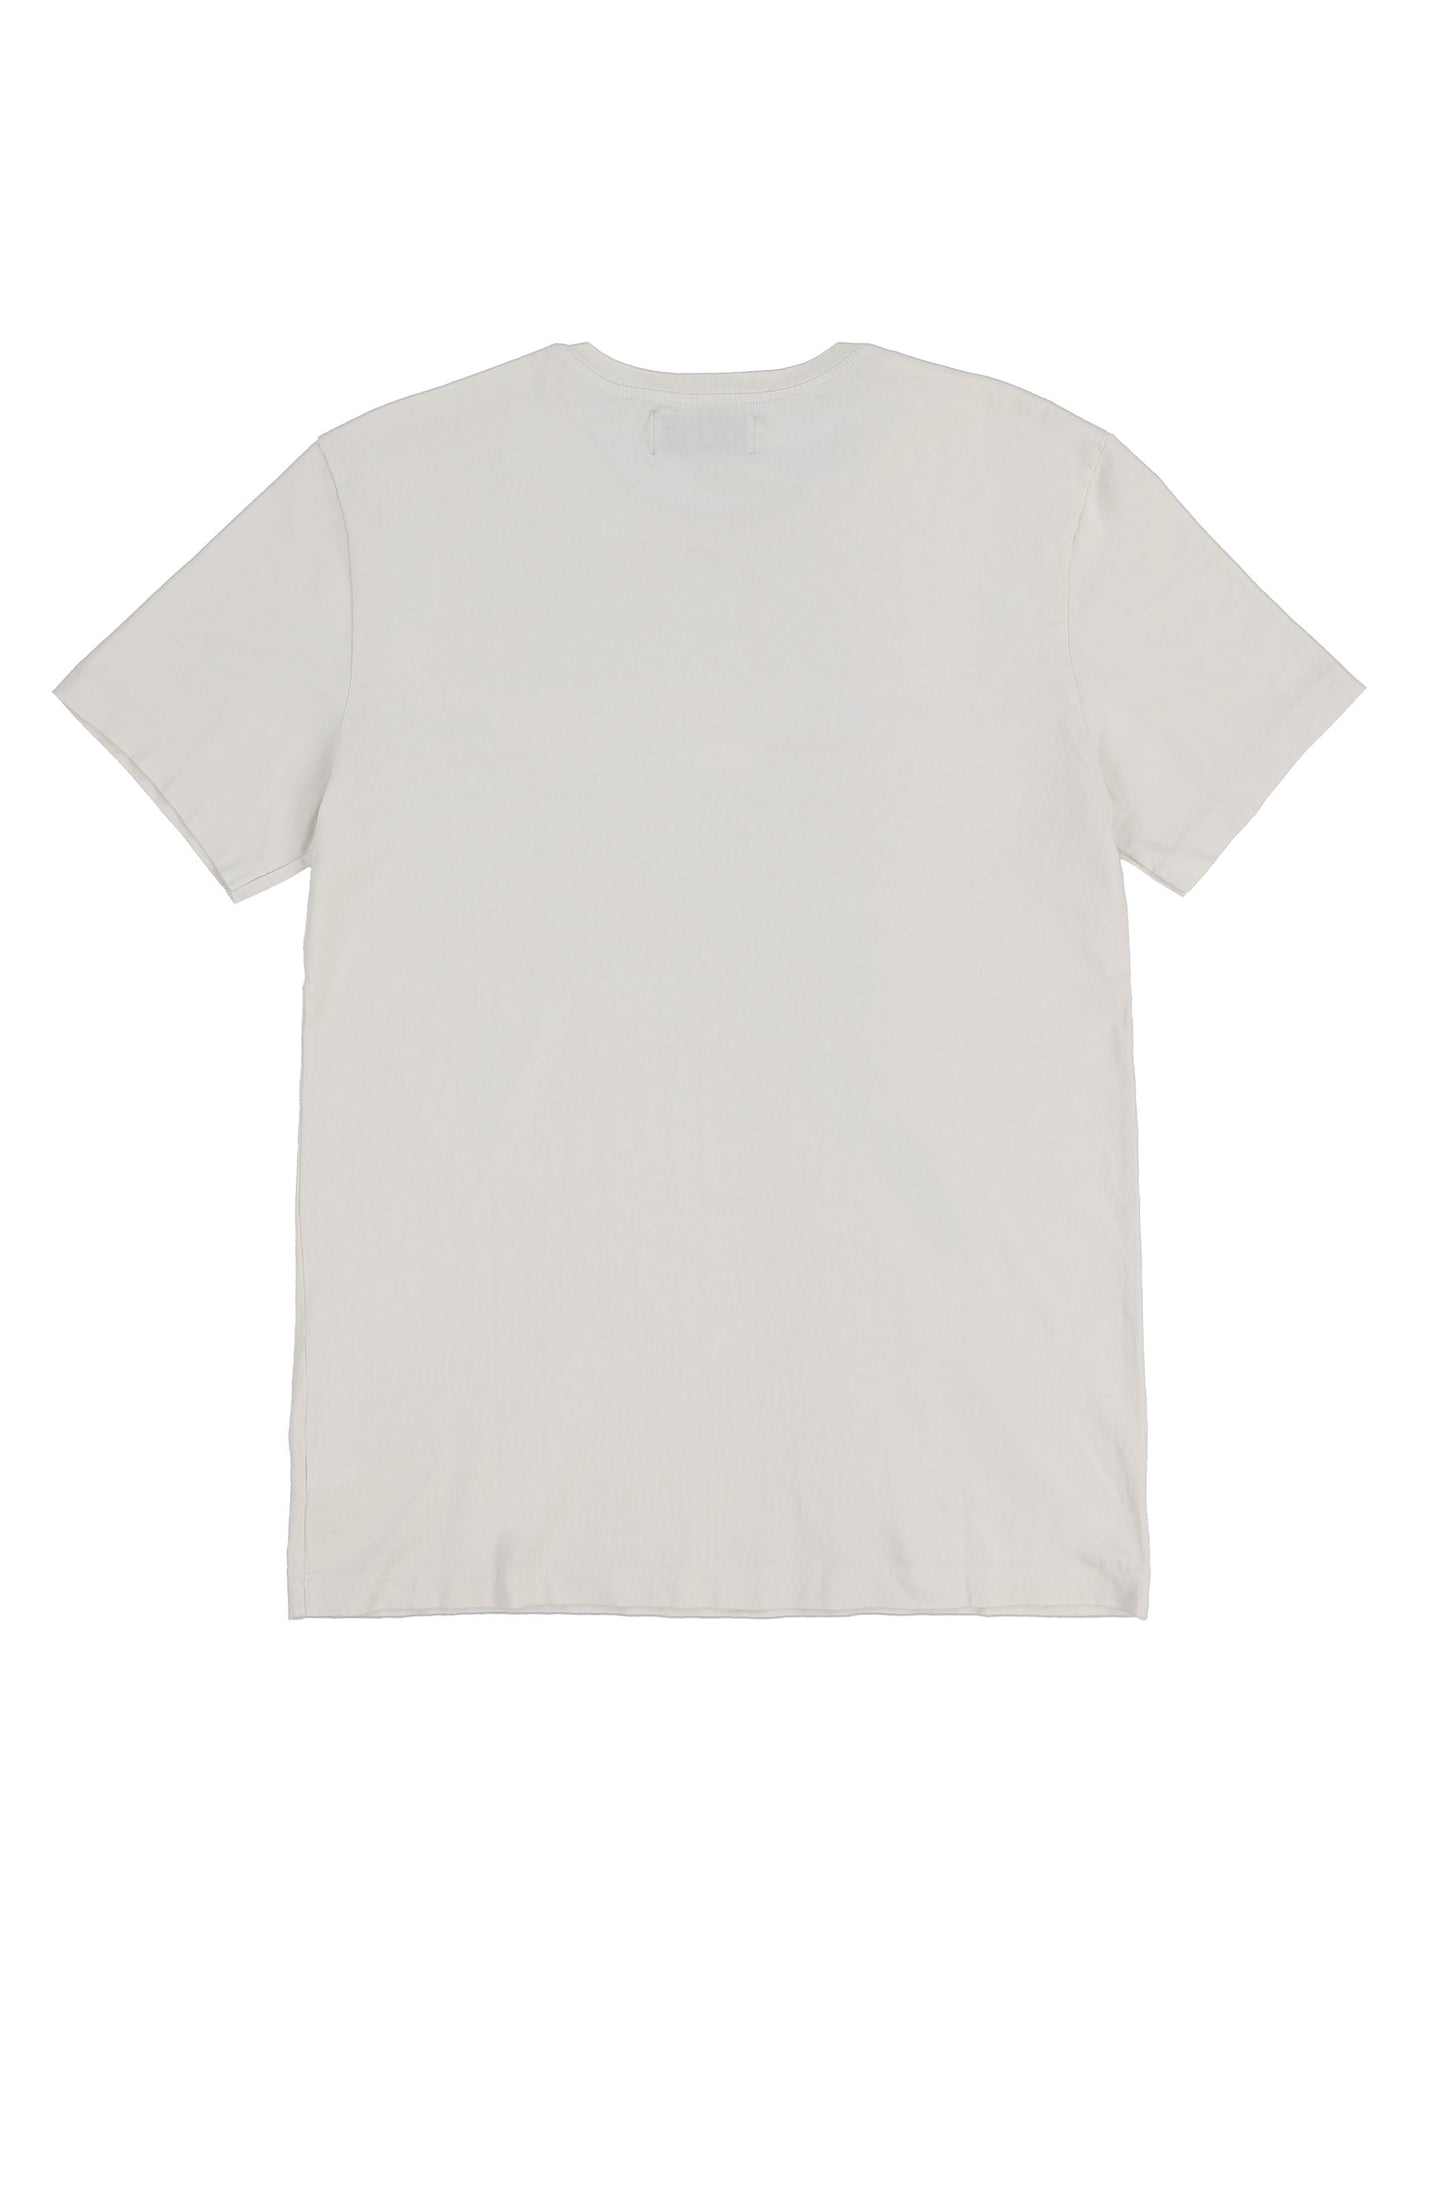 OYSTER NECK LAYERING TEE (VINTAGE WHITE)